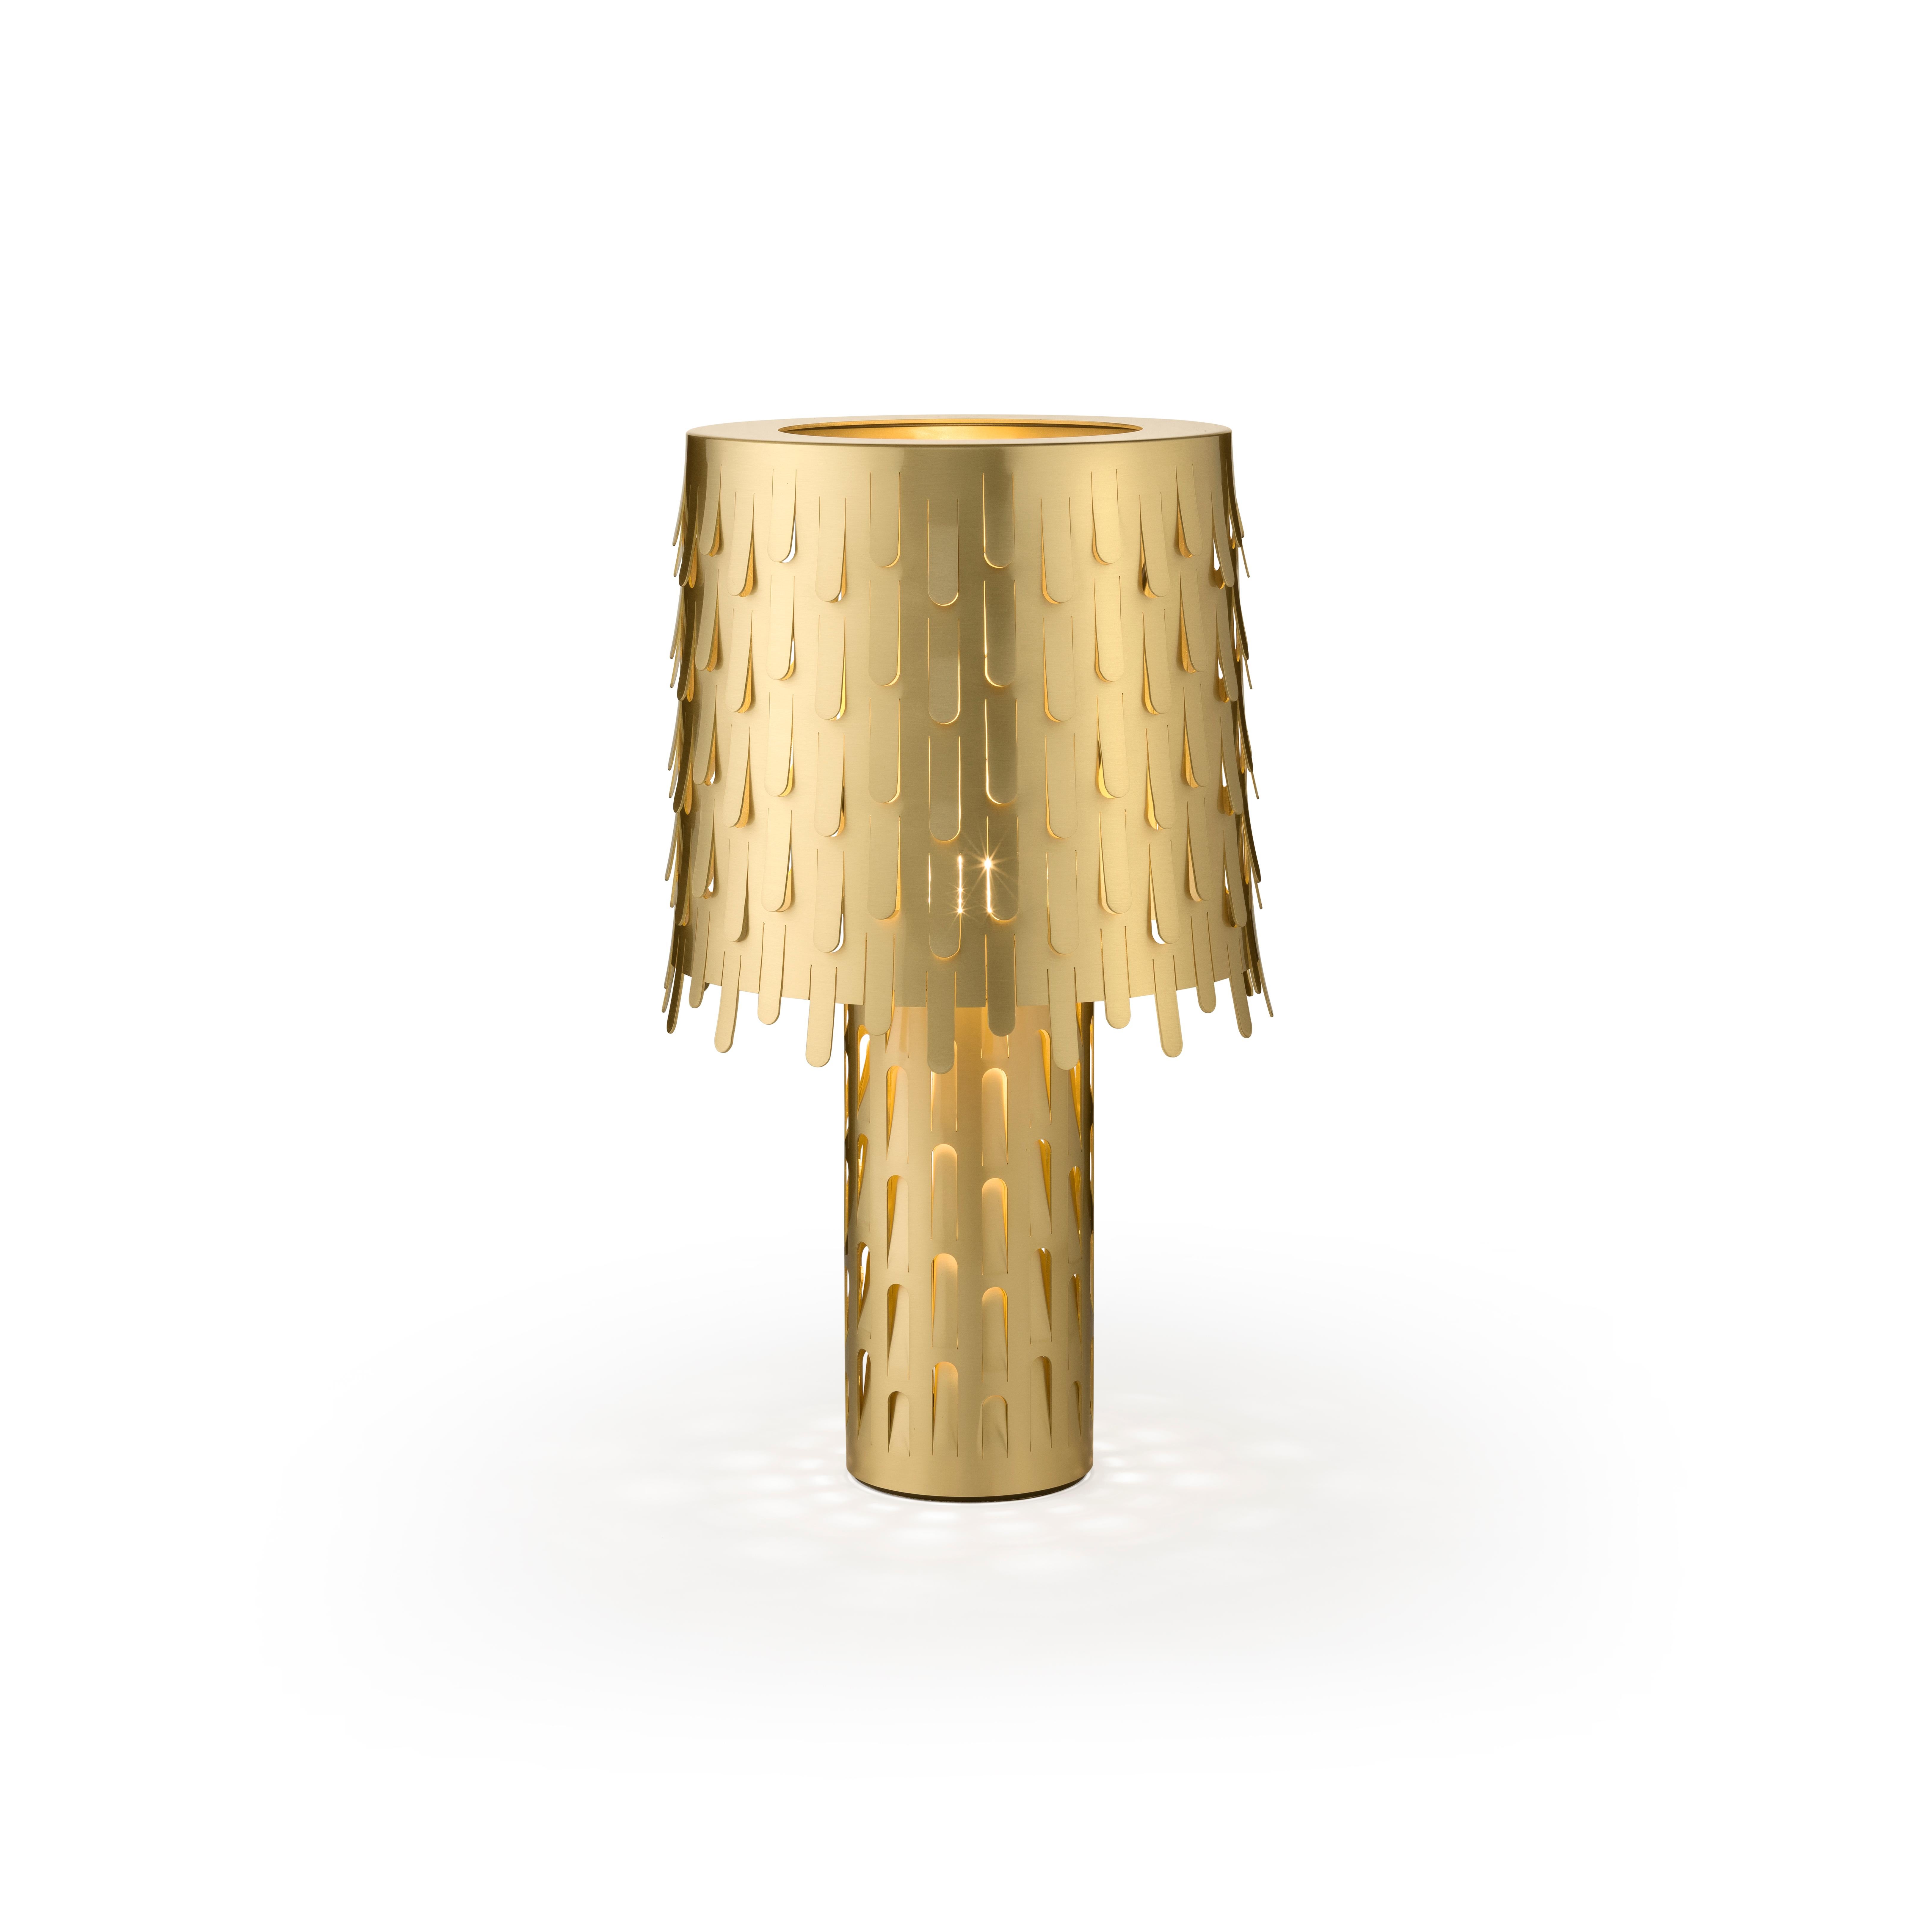 Jackfruit table lamp by campana brothers. The lamp is made of polished brass, synonymous of elegance and preciousness. It is composed of two overlapping cylinders, the large stem supports an important lampshade decorated with a thousand leaves bent